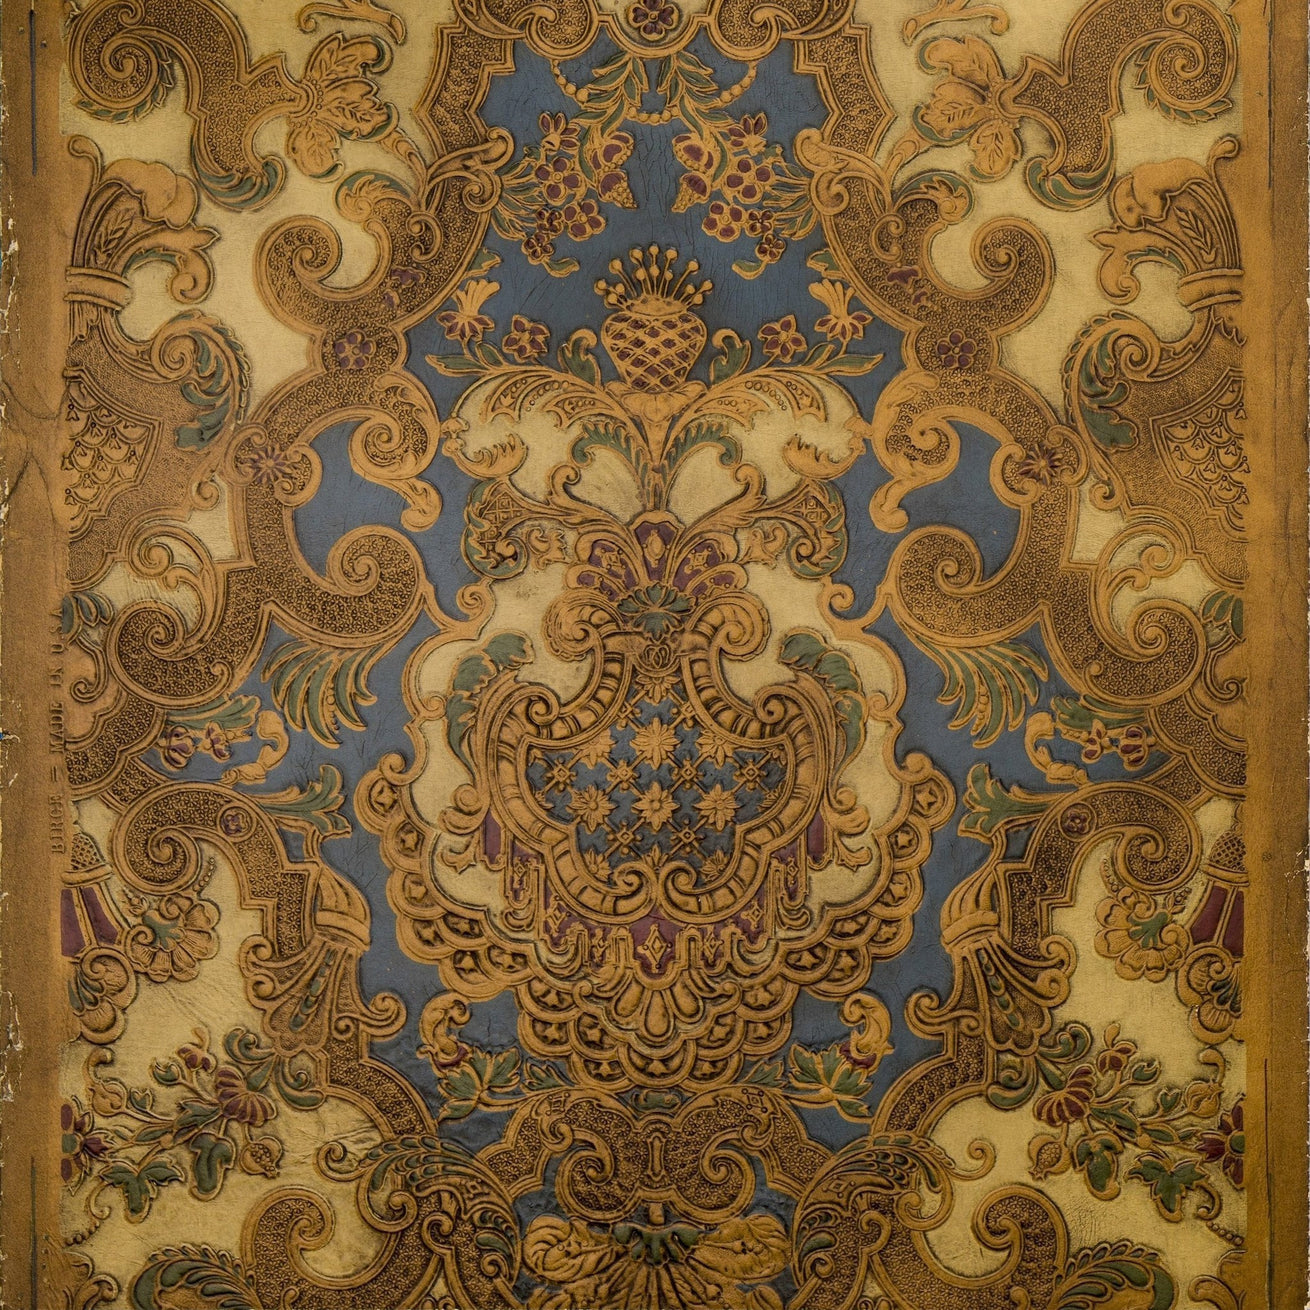 Intricate Rococo Tooled Leather - Antique Wallpaper Remnant